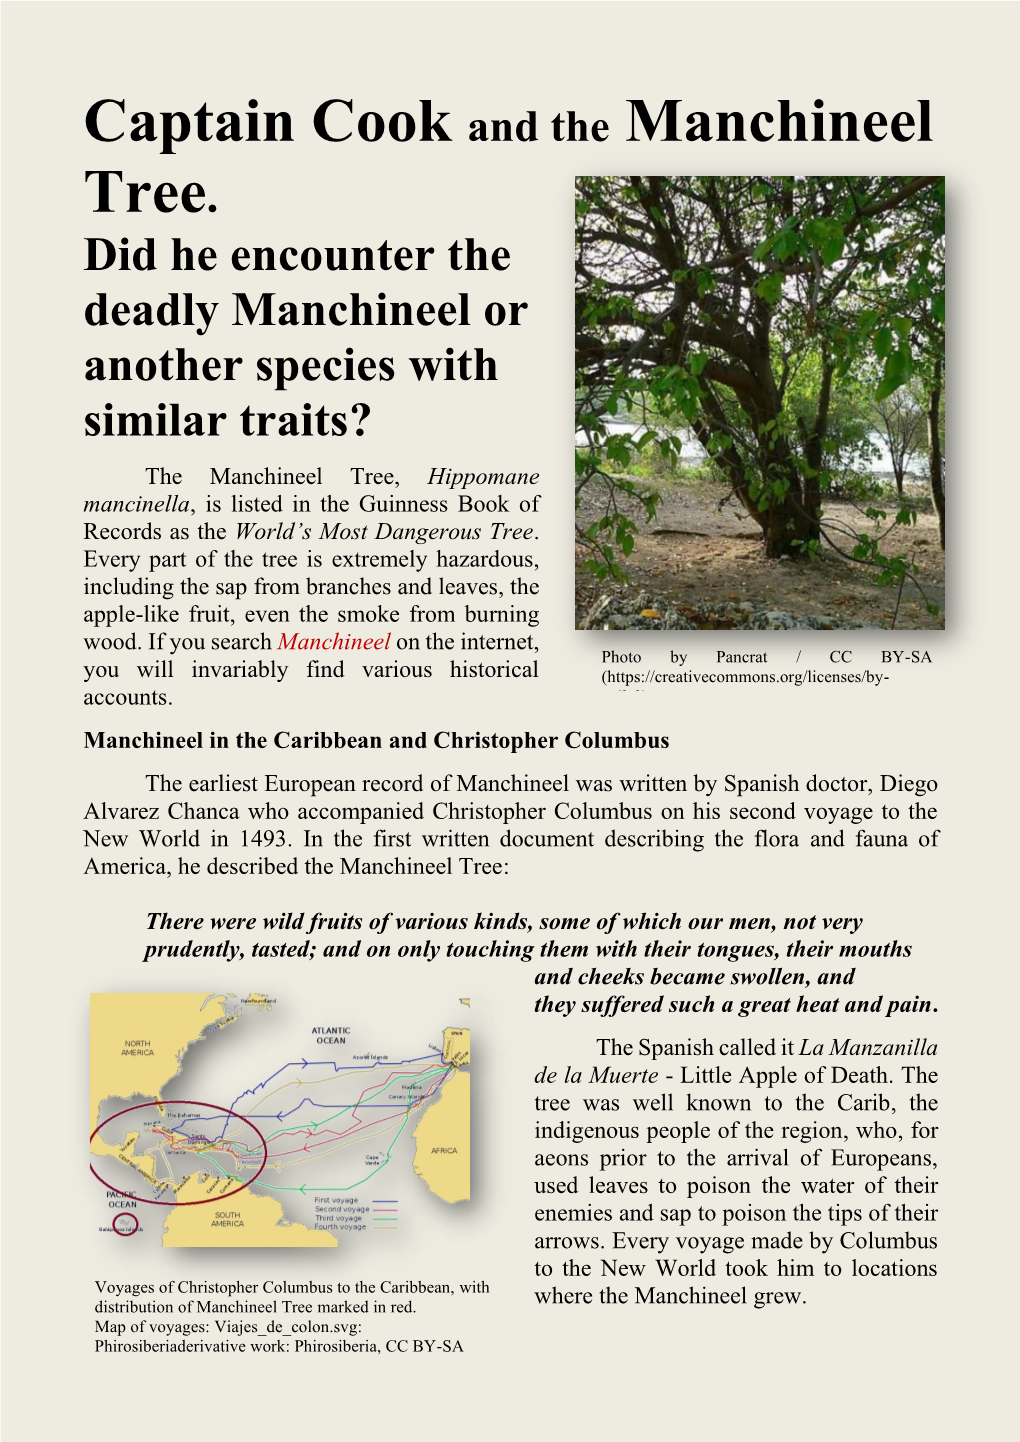 Captain Cook and the Manchineel Tree. Did He Encounter the Deadly Manchineel Or Another Species with Similar Traits?